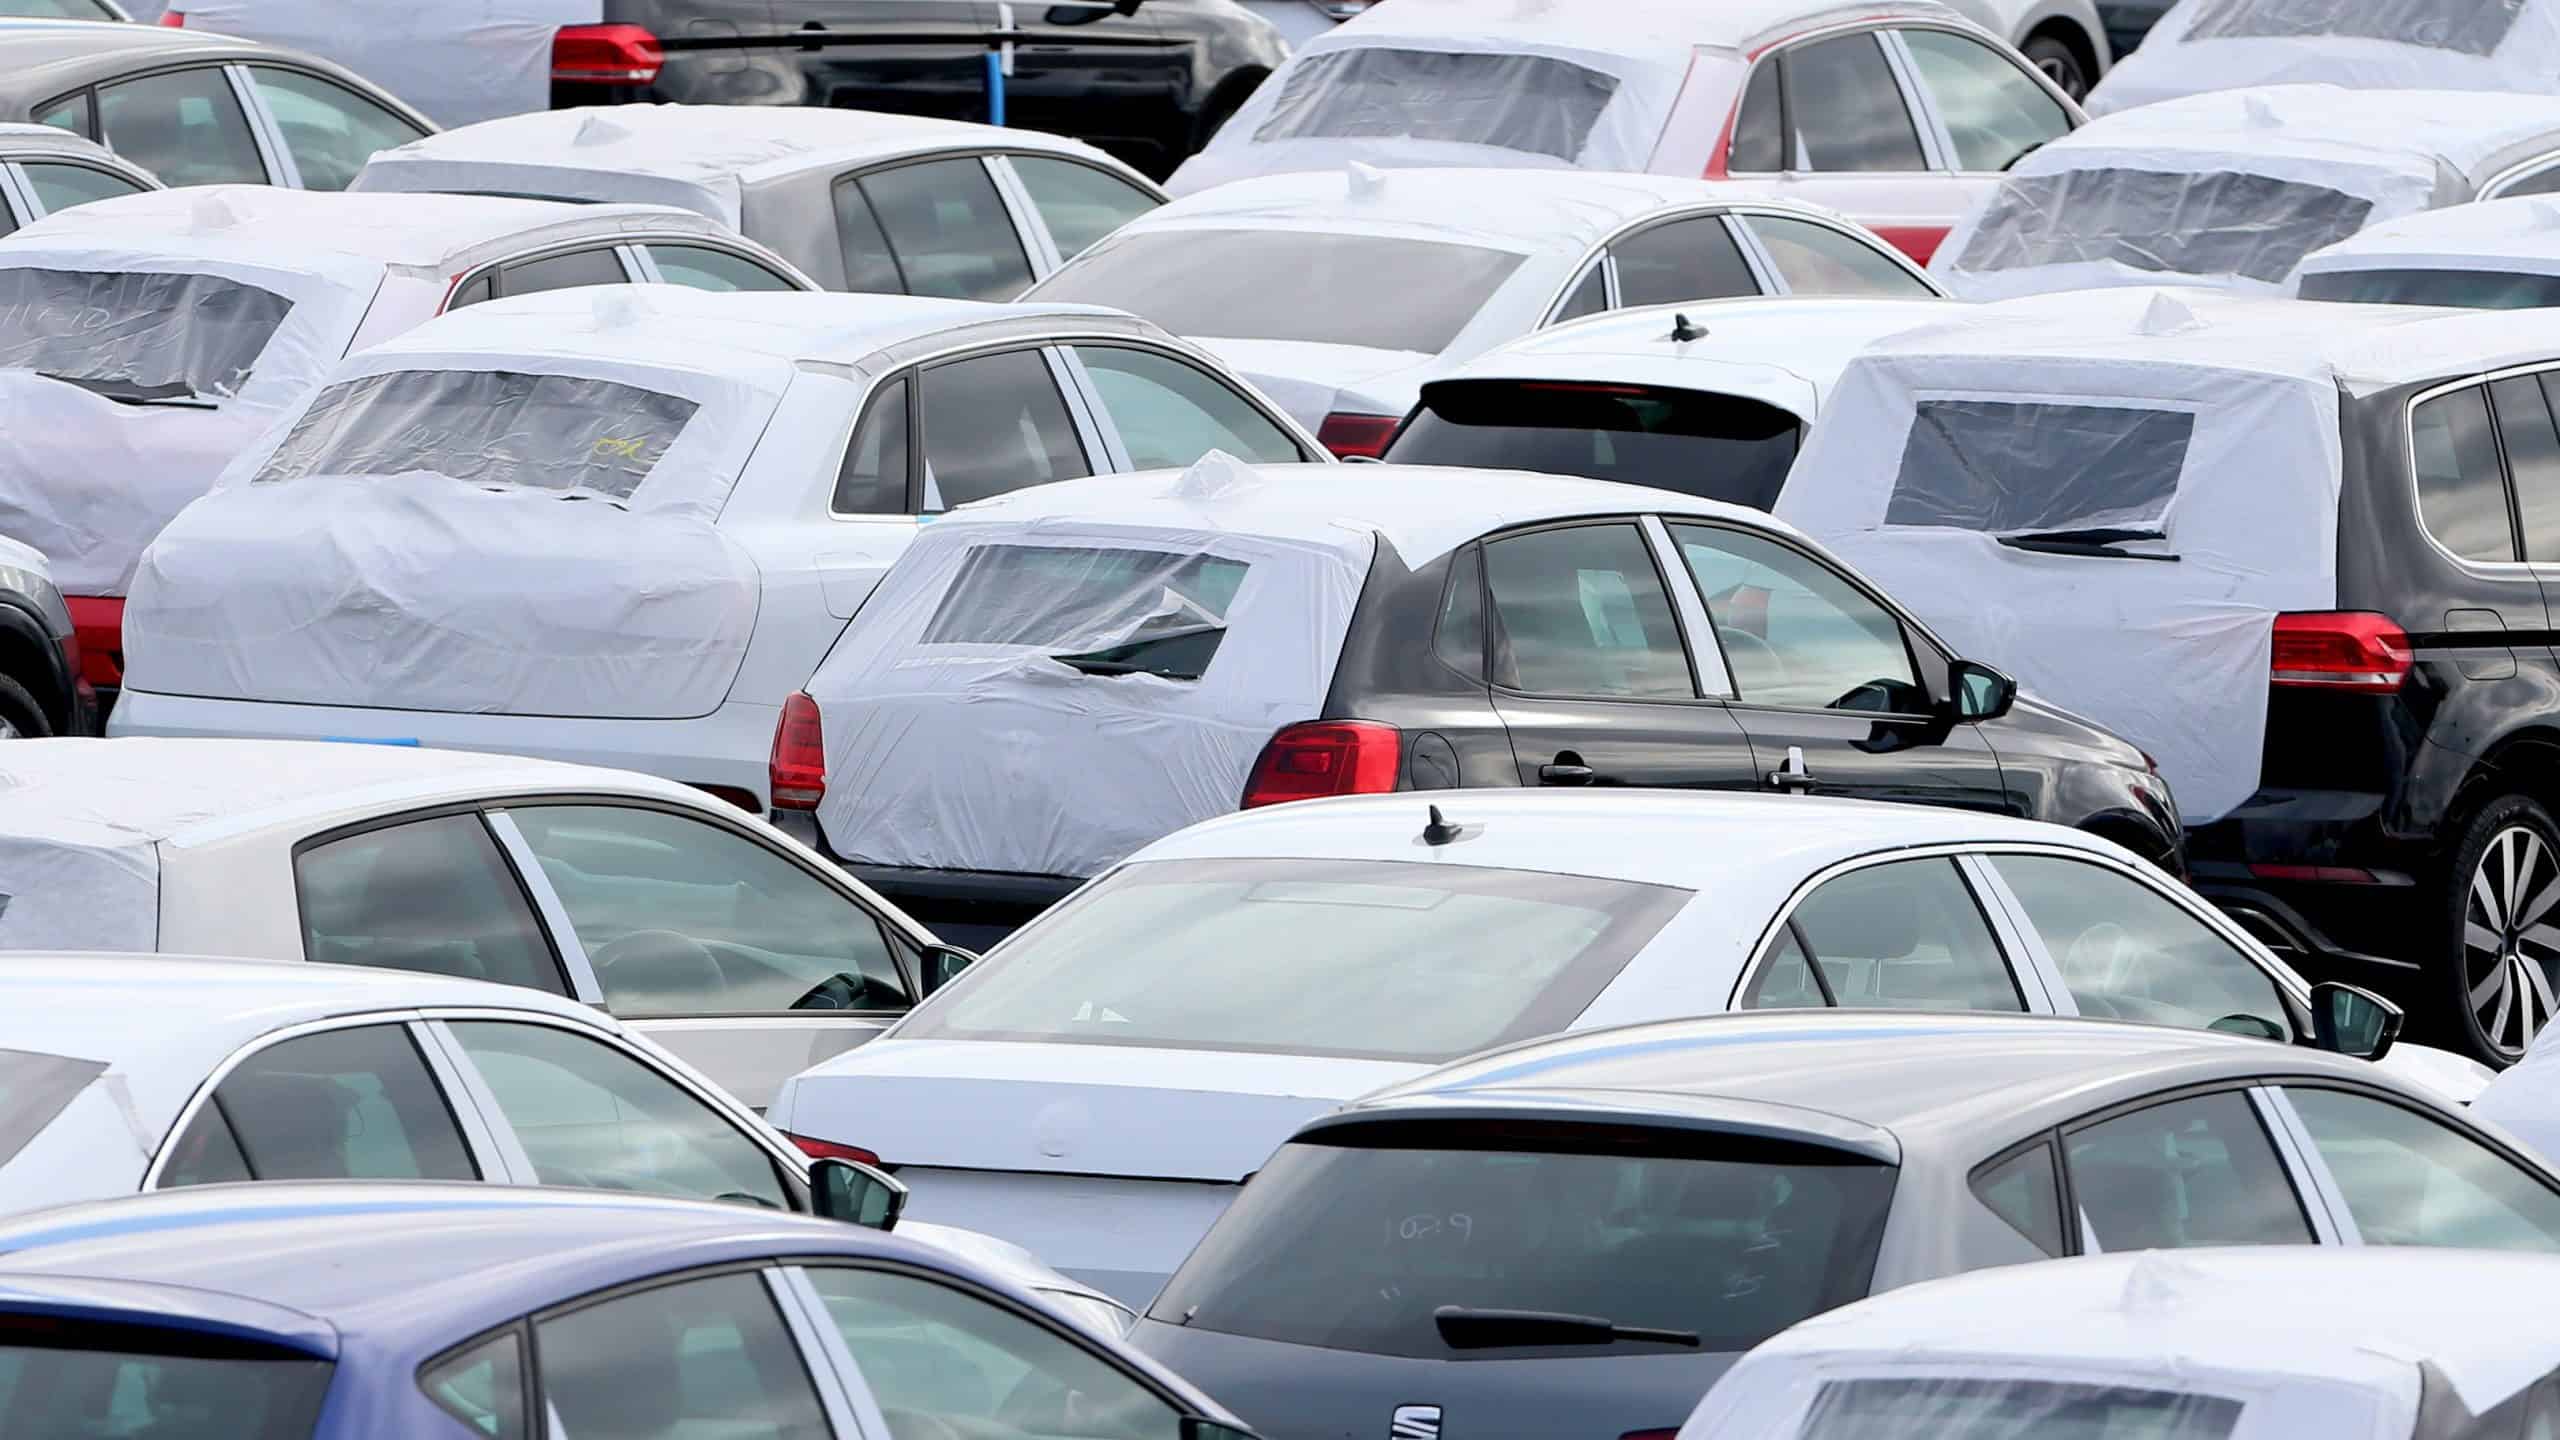 Eye-watering cost of no-deal Brexit on automotive industry revealed